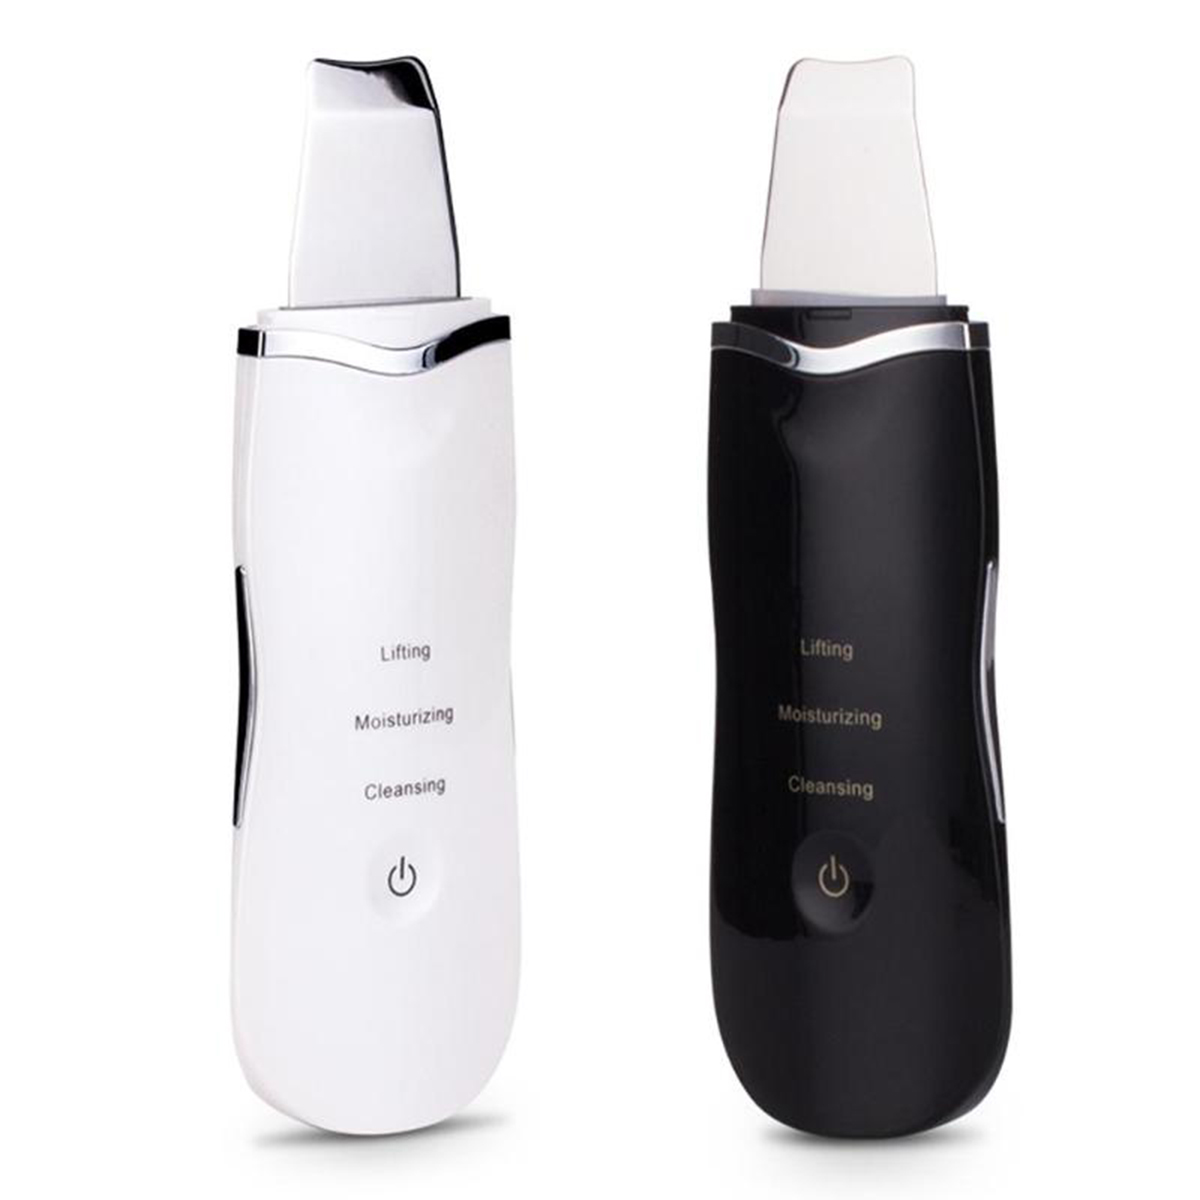 

USB Rechargeable Ultrasonic Scrubber Skin Facial Cleaner